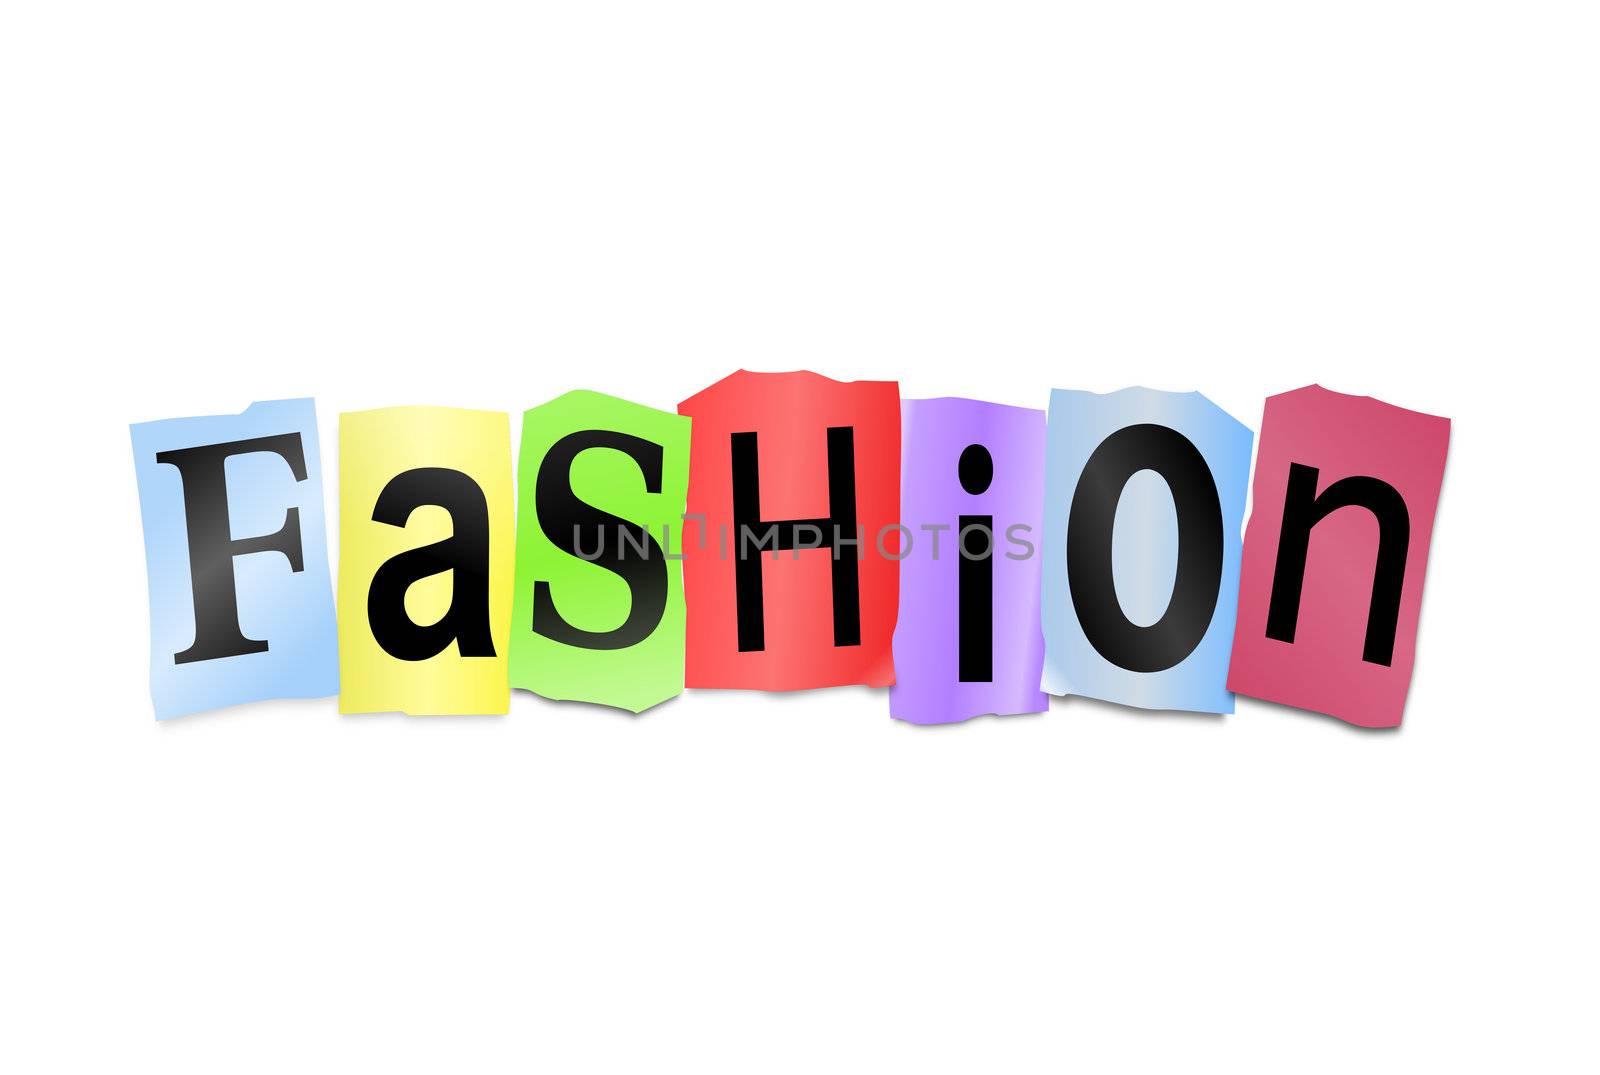 Illustration depicting cutout printed letters arranged to form the word fashion.